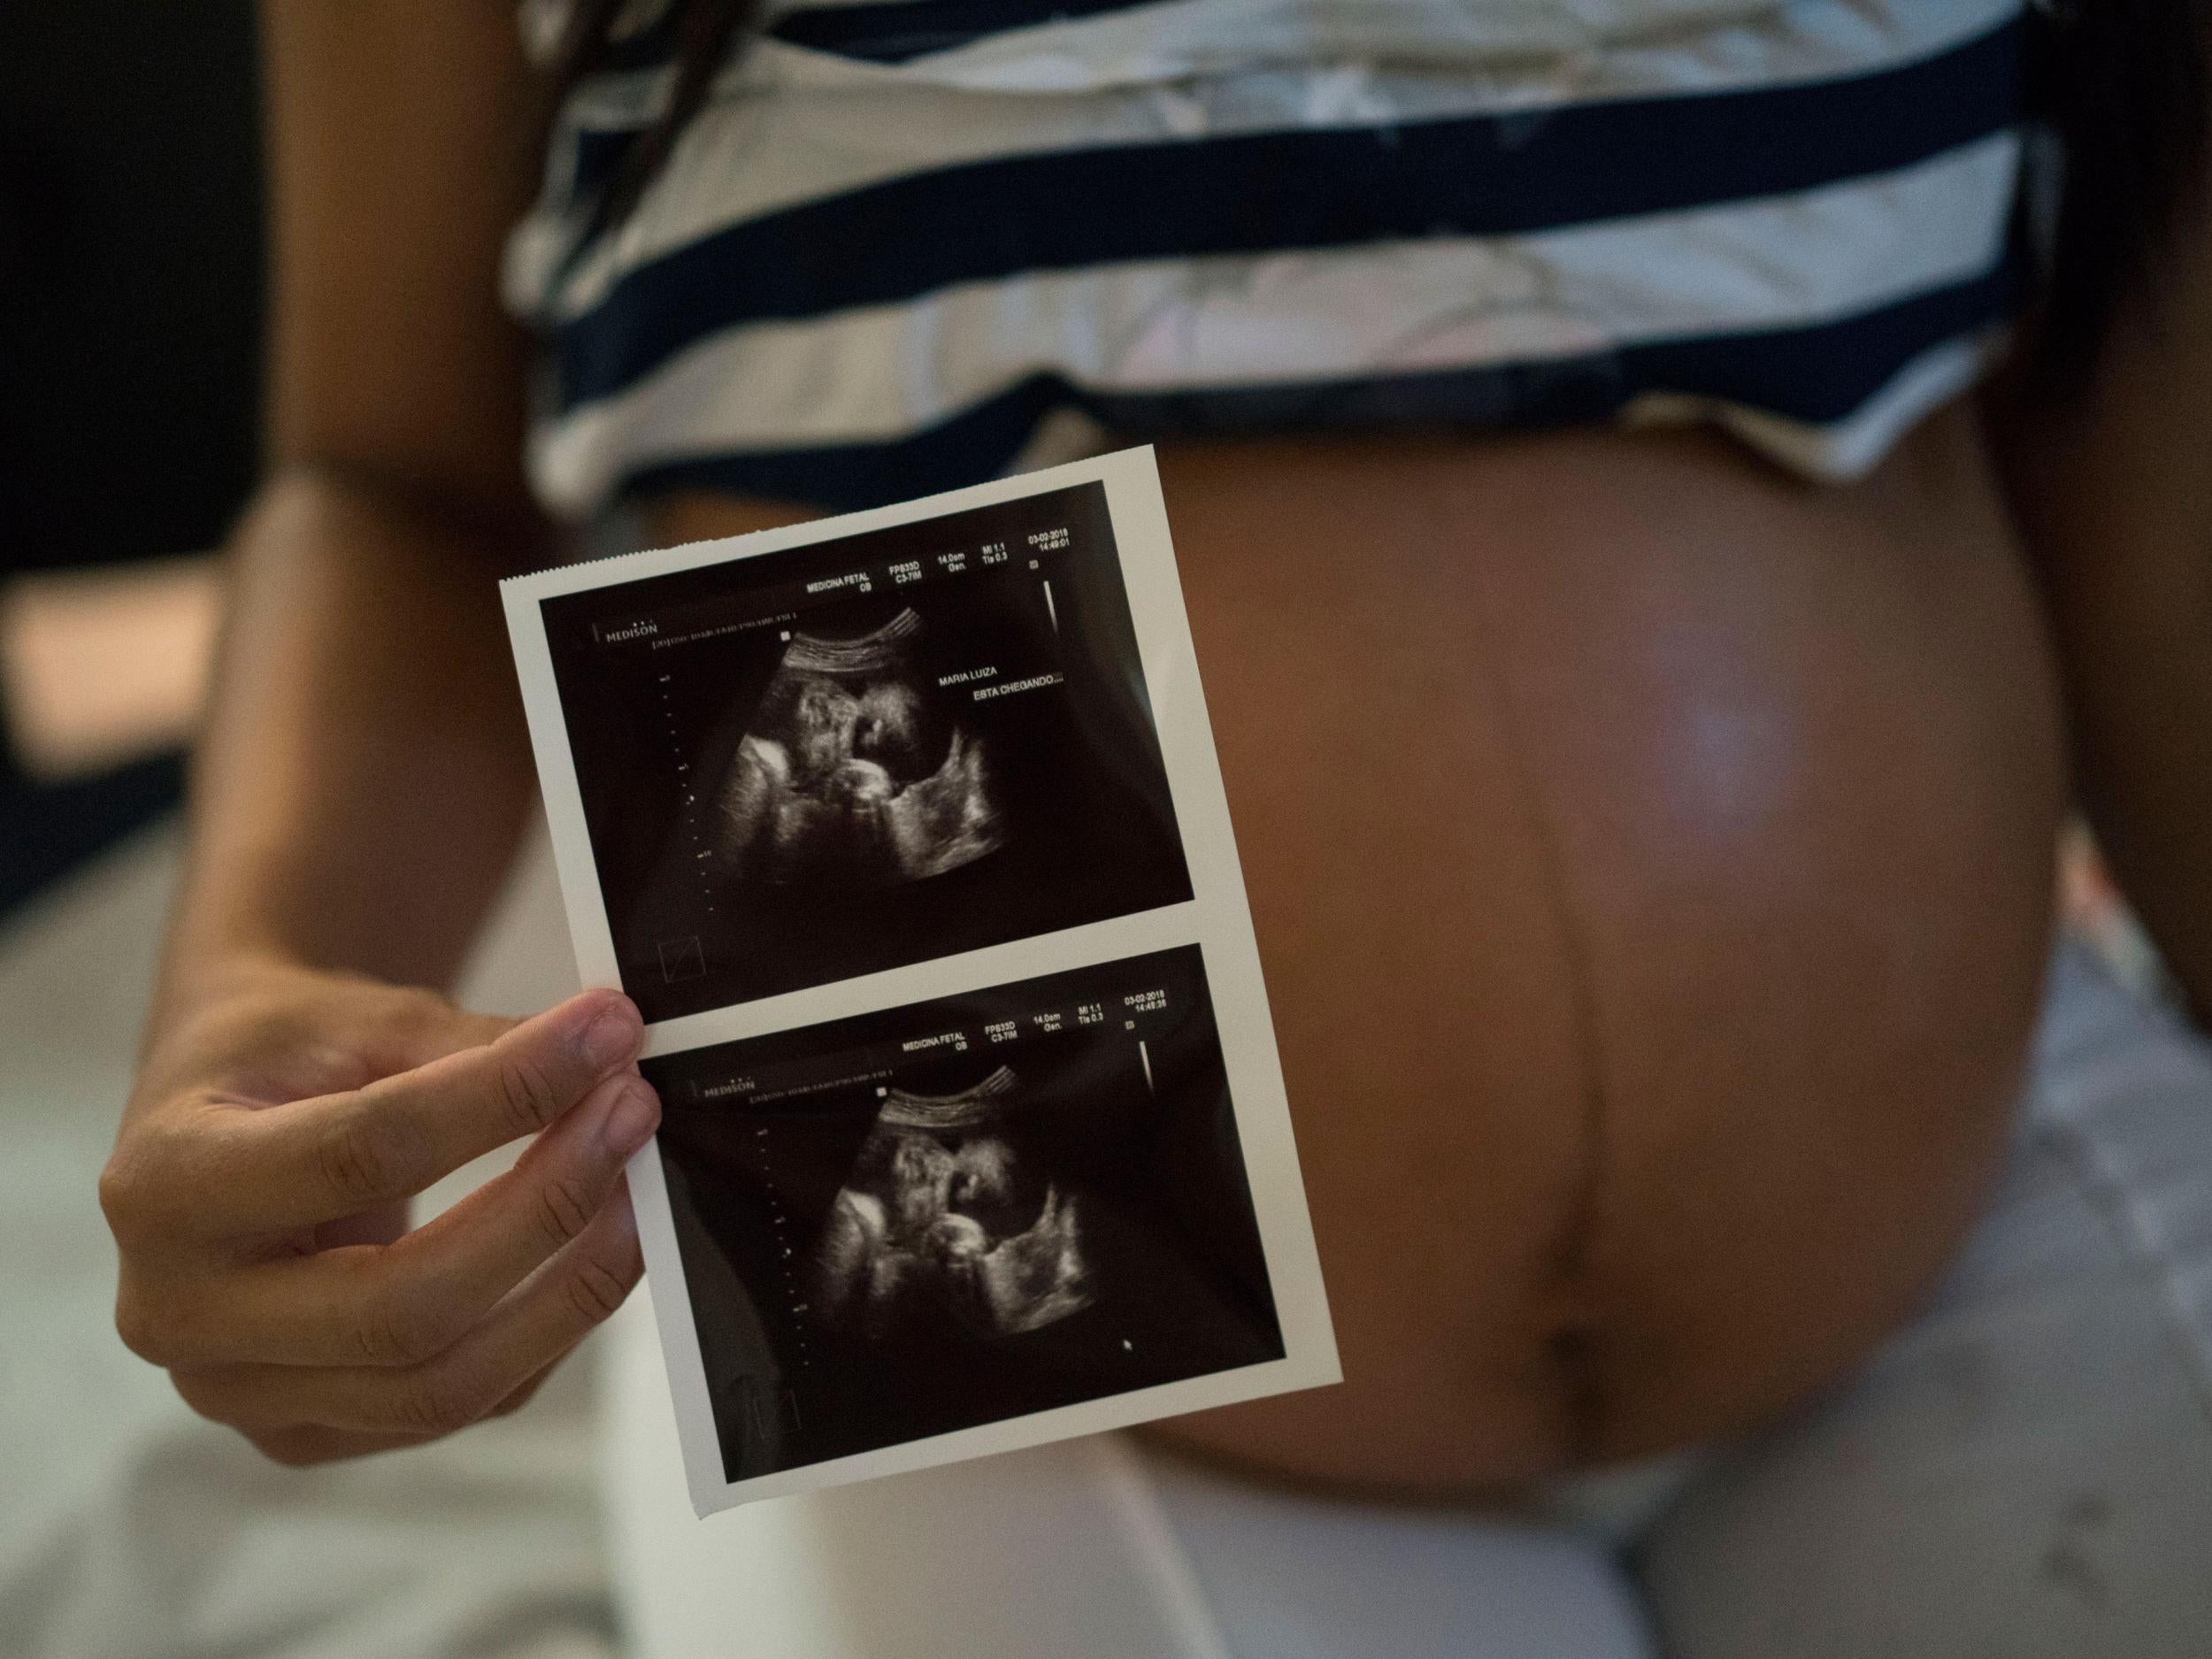 The debate to legalise abortion in Brazil has gained prominence since the outbreak of the virus